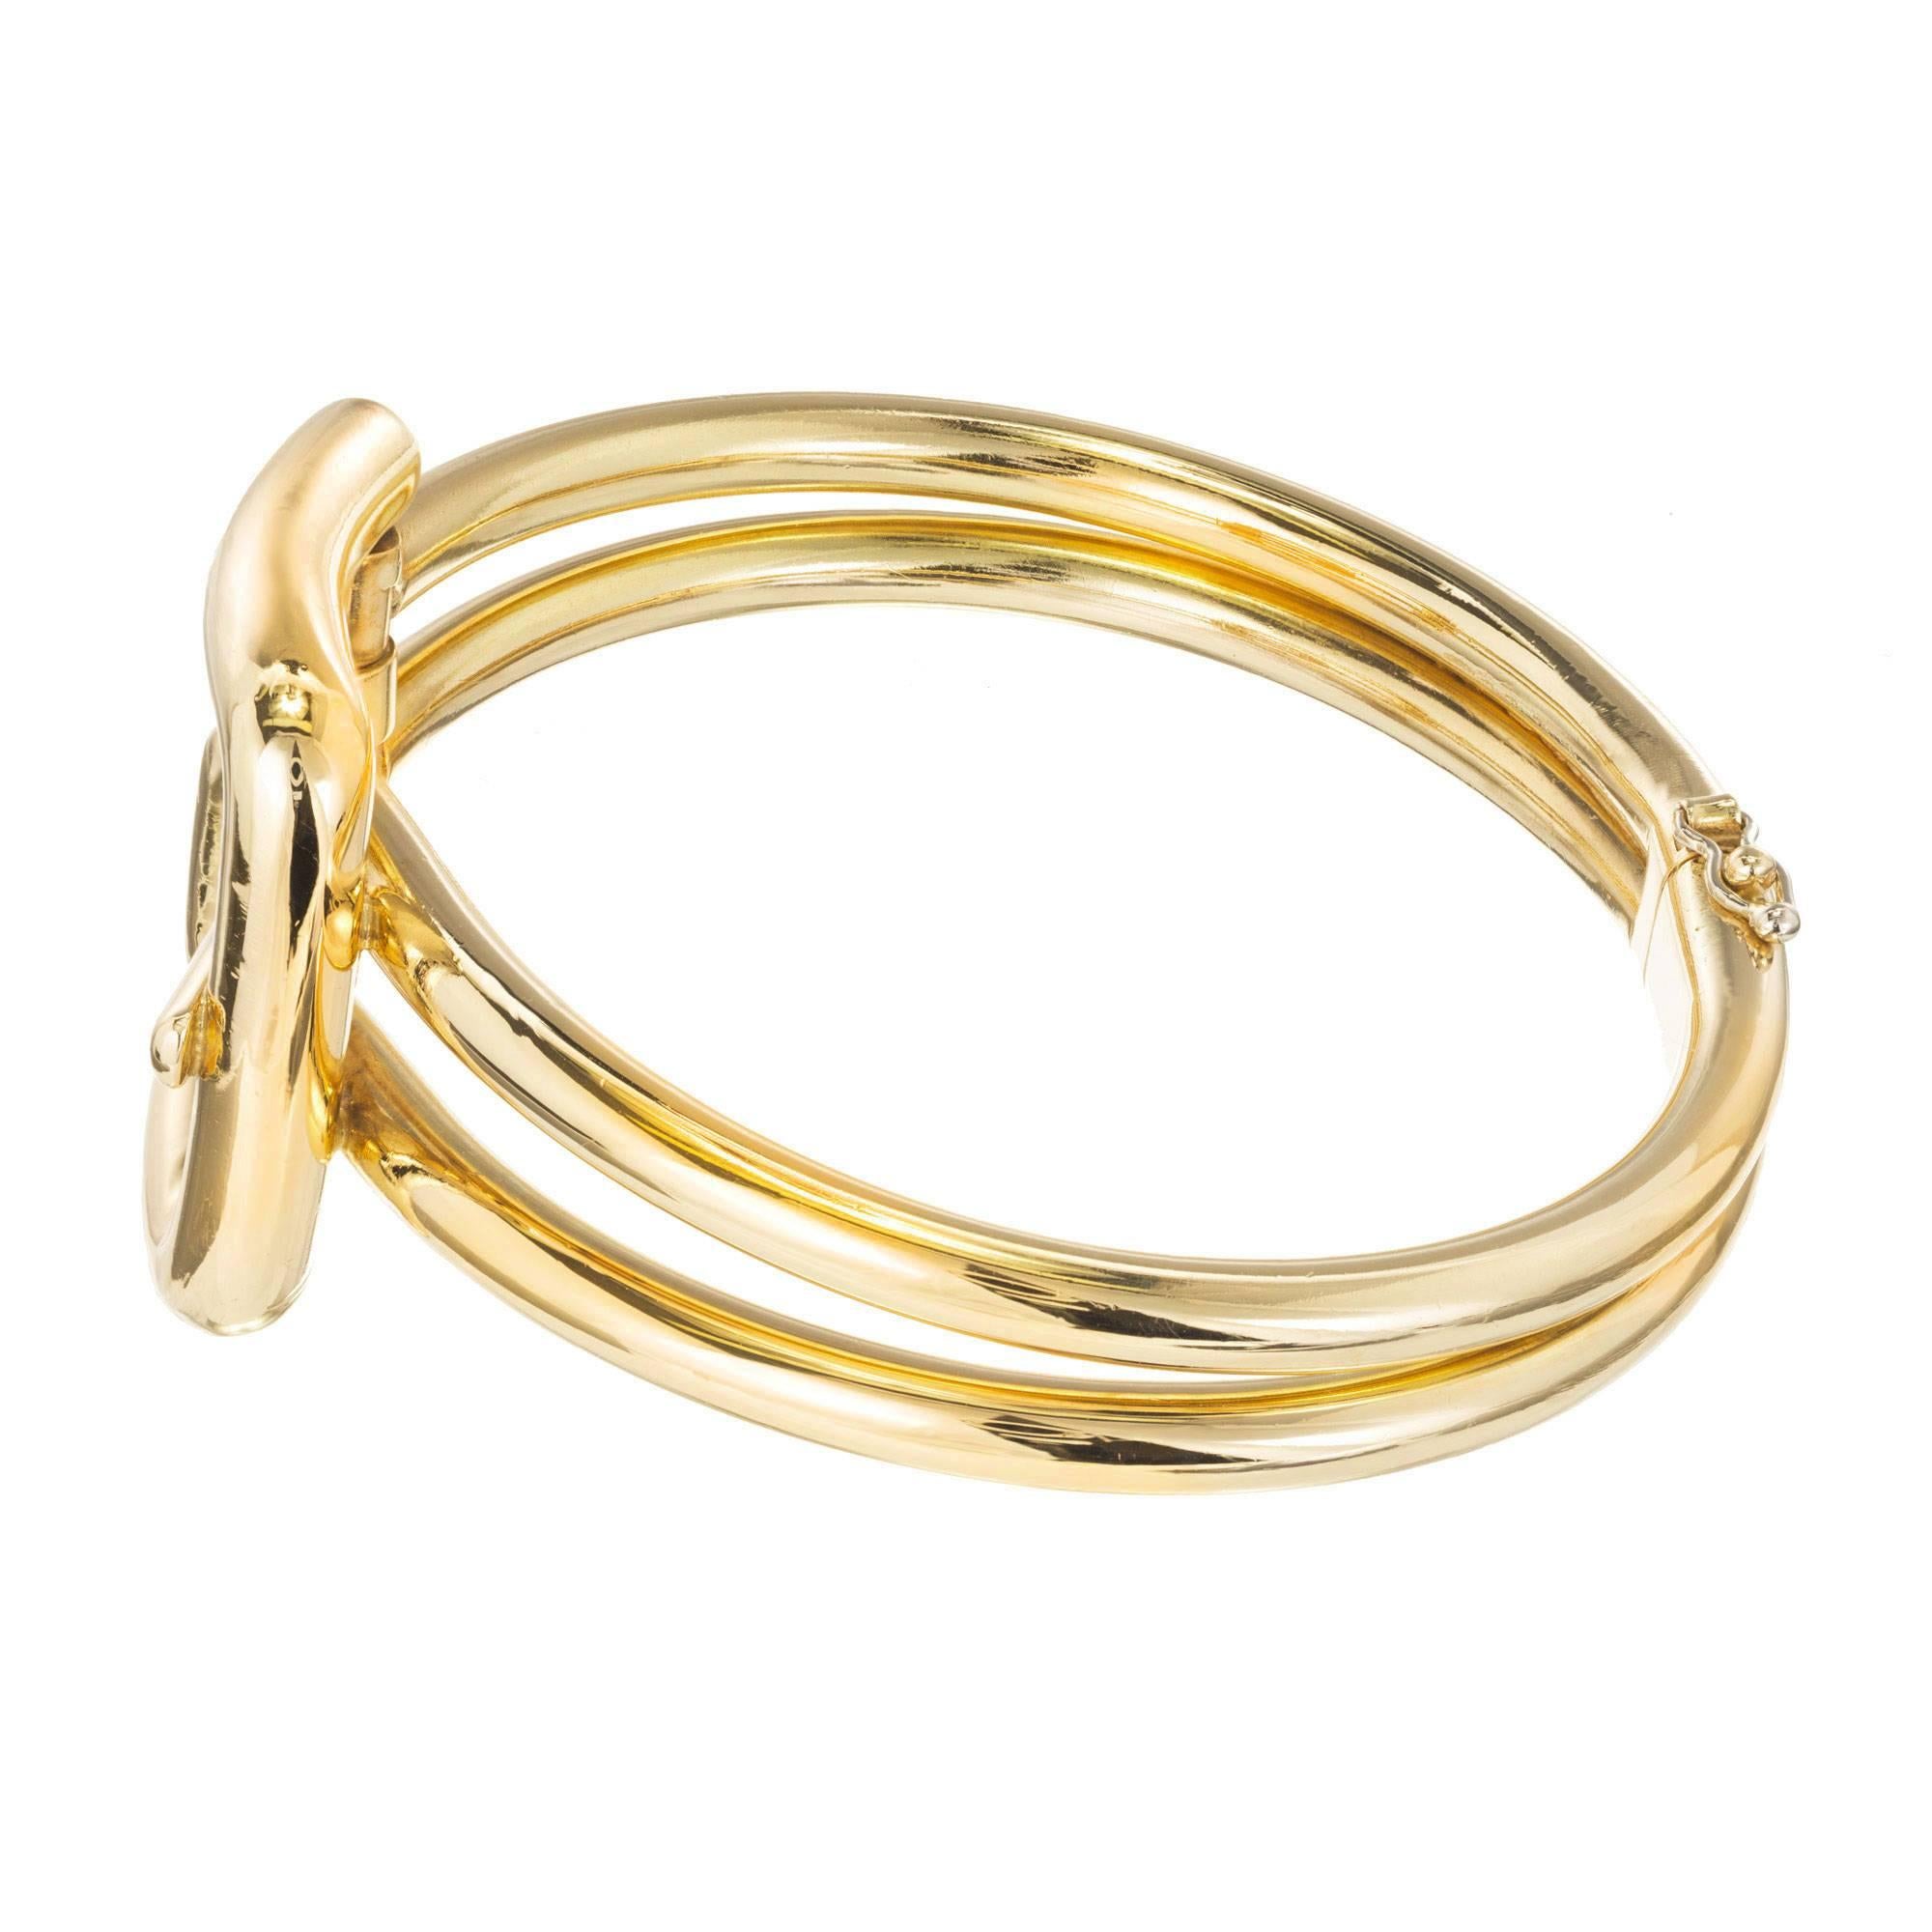 Buckle style hinged bangle bracelet circa 1950-1960. Thick heavy 18k yellow gold tubing.

18k yellow gold
fits a 7 1/2 in wrist
32.6 grams
Stamped: Italy 18k
Hallmark: MCM
Width at top: 29.42mm
Height at top: 11.97mm
Width at Bottom: 9.71mm
Tubing: